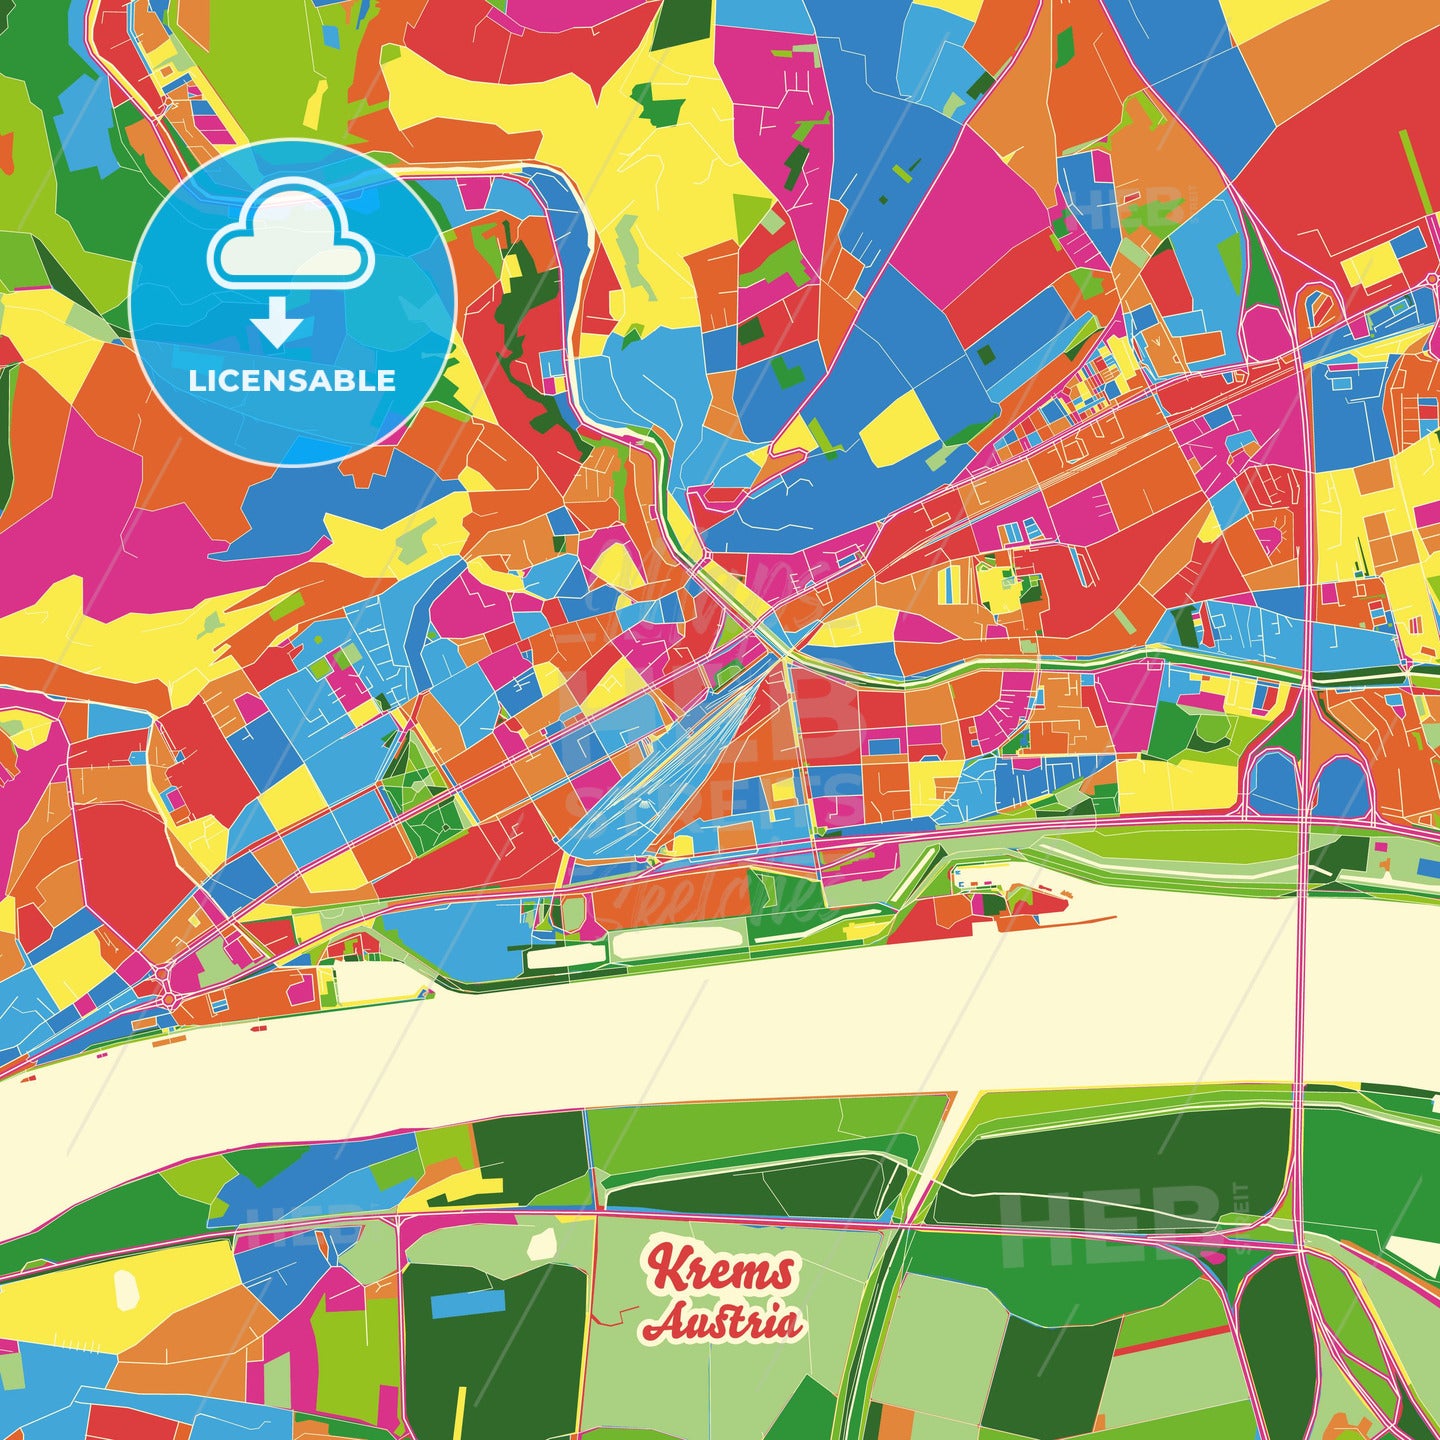 Krems, Austria Crazy Colorful Street Map Poster Template - HEBSTREITS Sketches